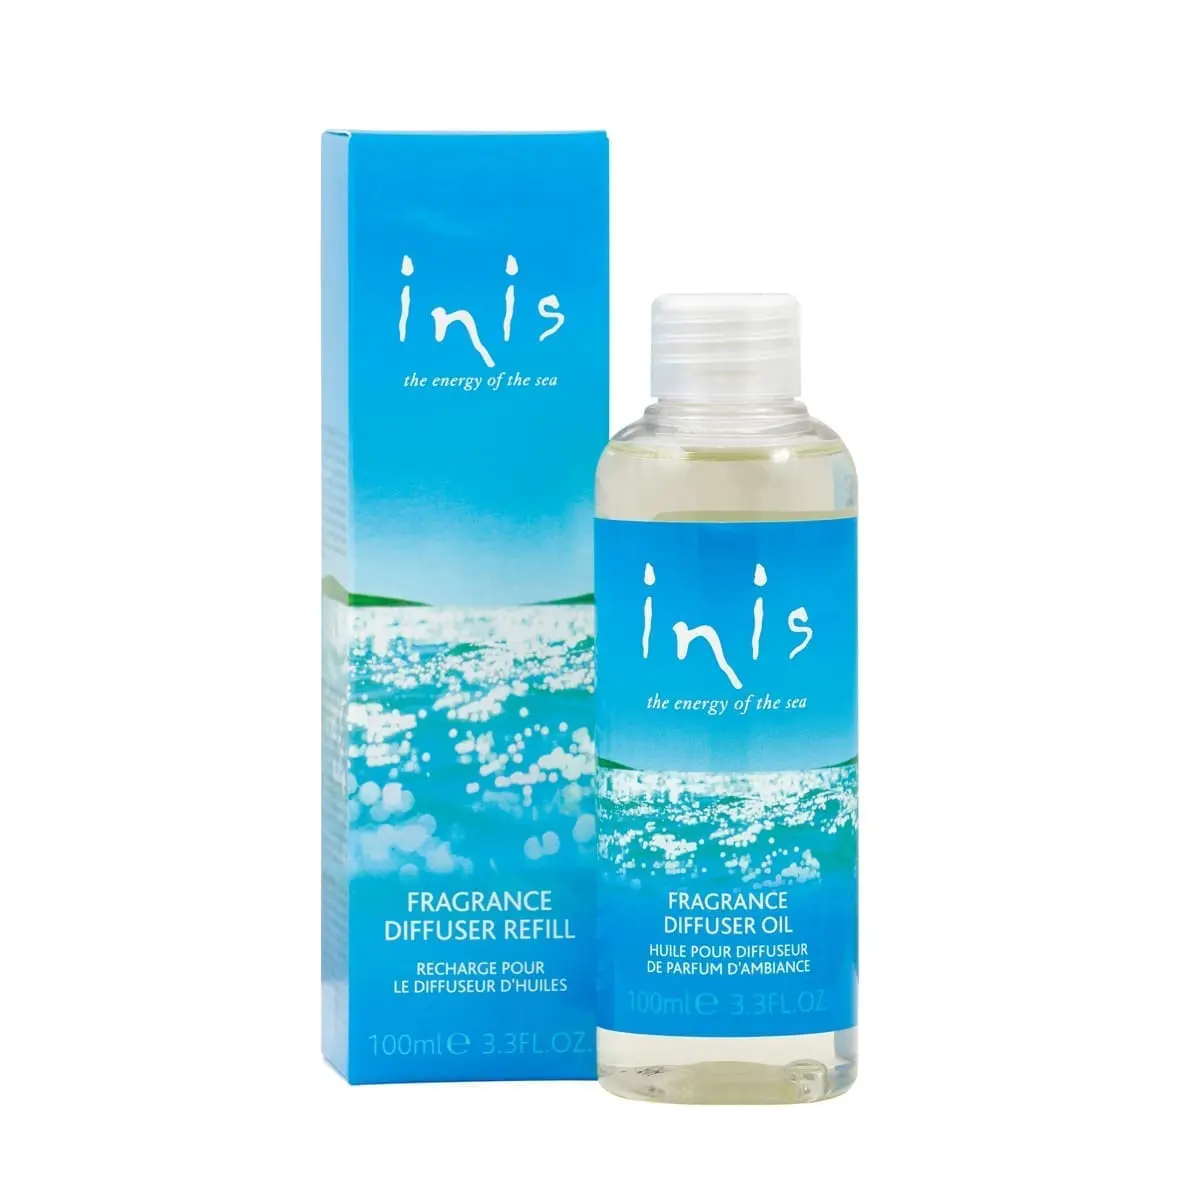 A bottle of inis oil sitting next to its box.